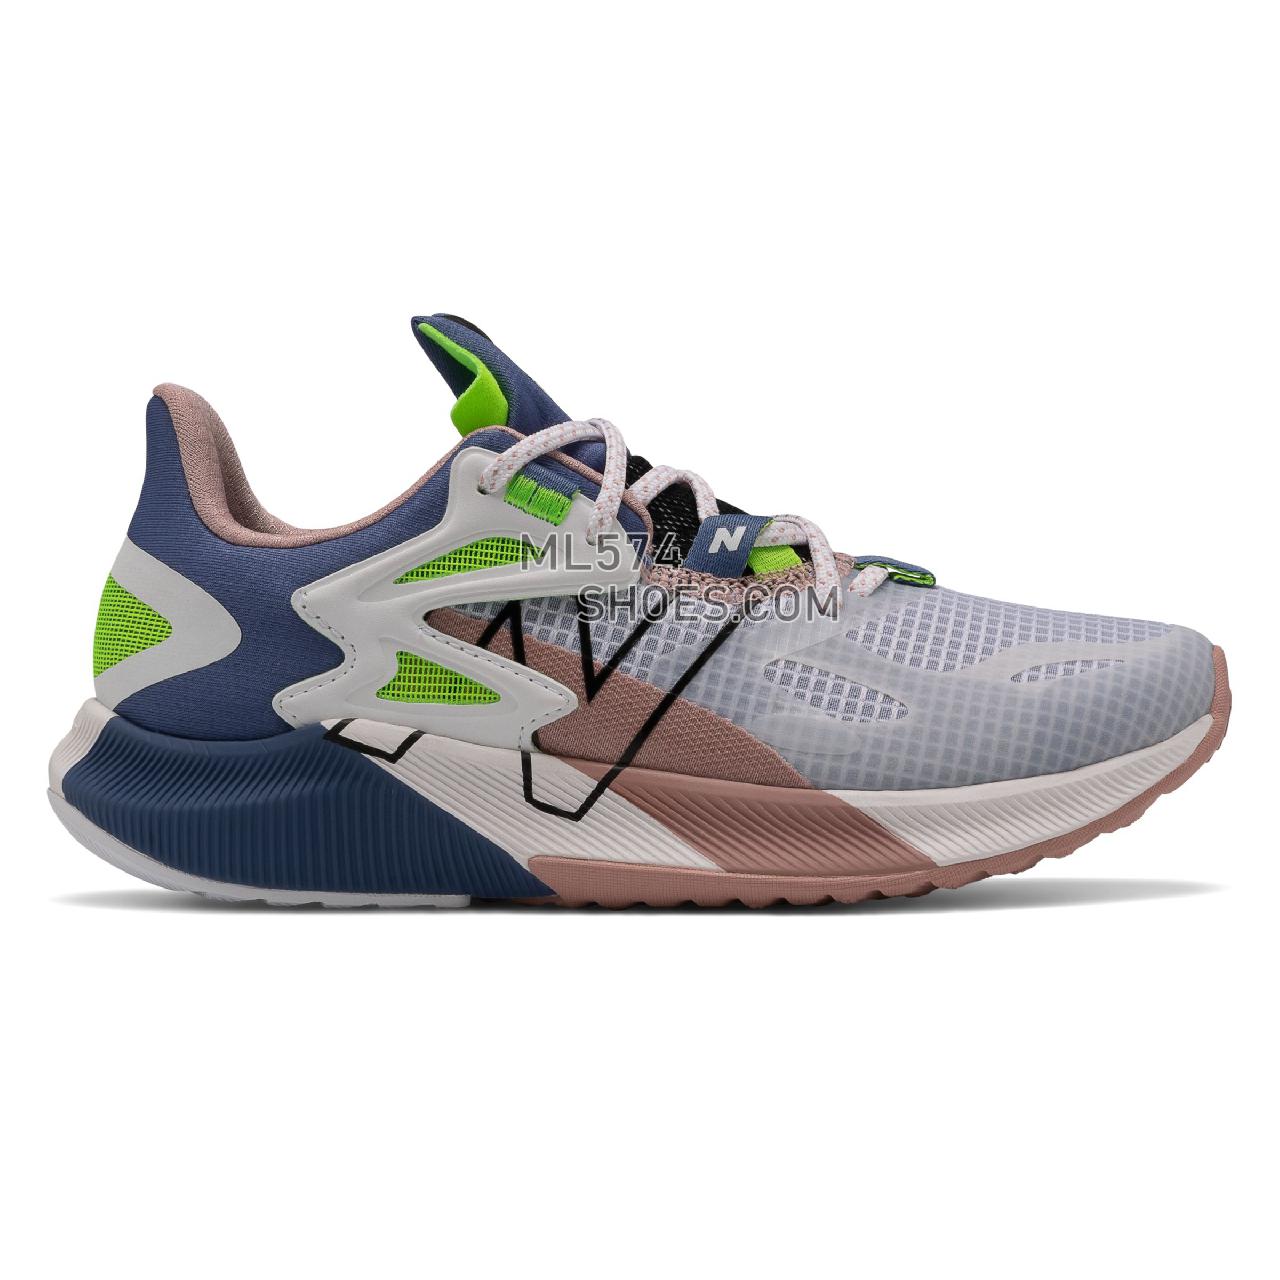 New Balance FuelCell Propel RMX - Women's Neutral Running - White with Saturn Pink and Energy Lime - WPRMXLW